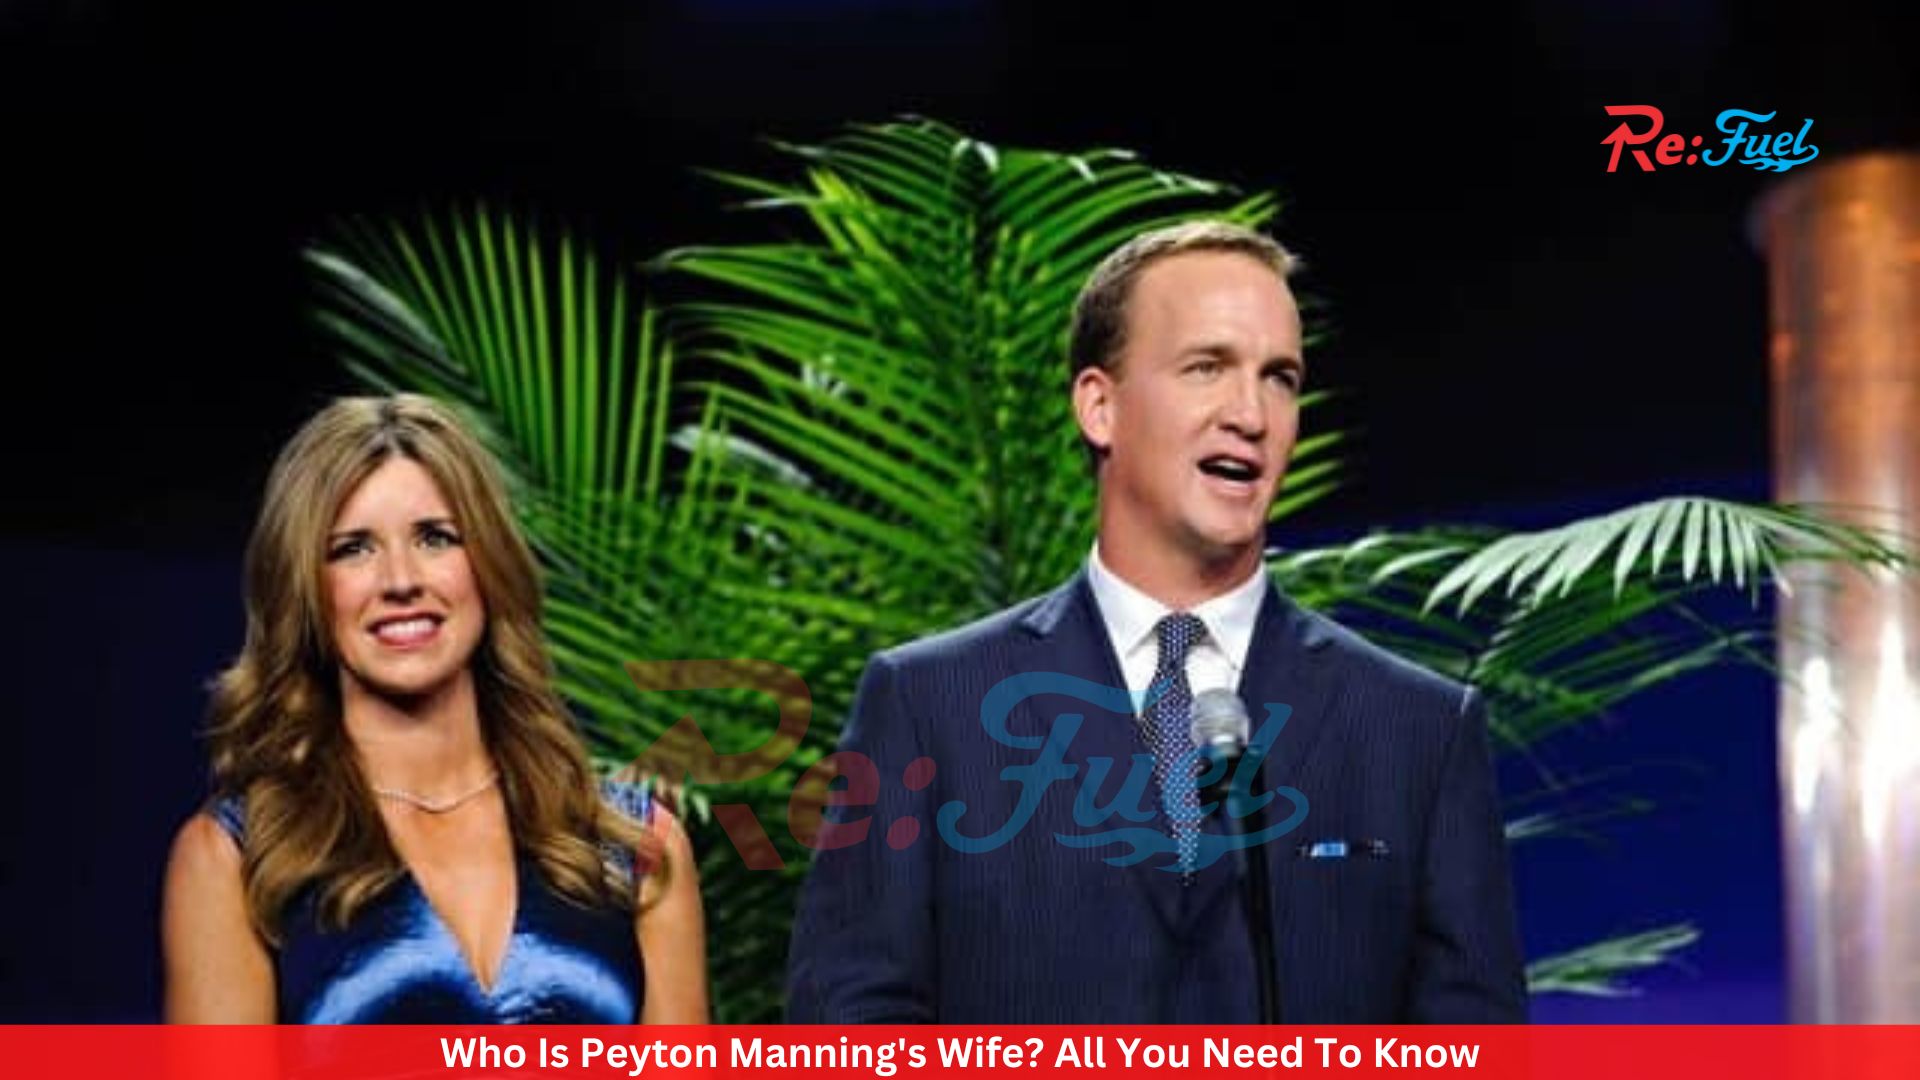 Who Is Peyton Manning's Wife? All You Need To Know